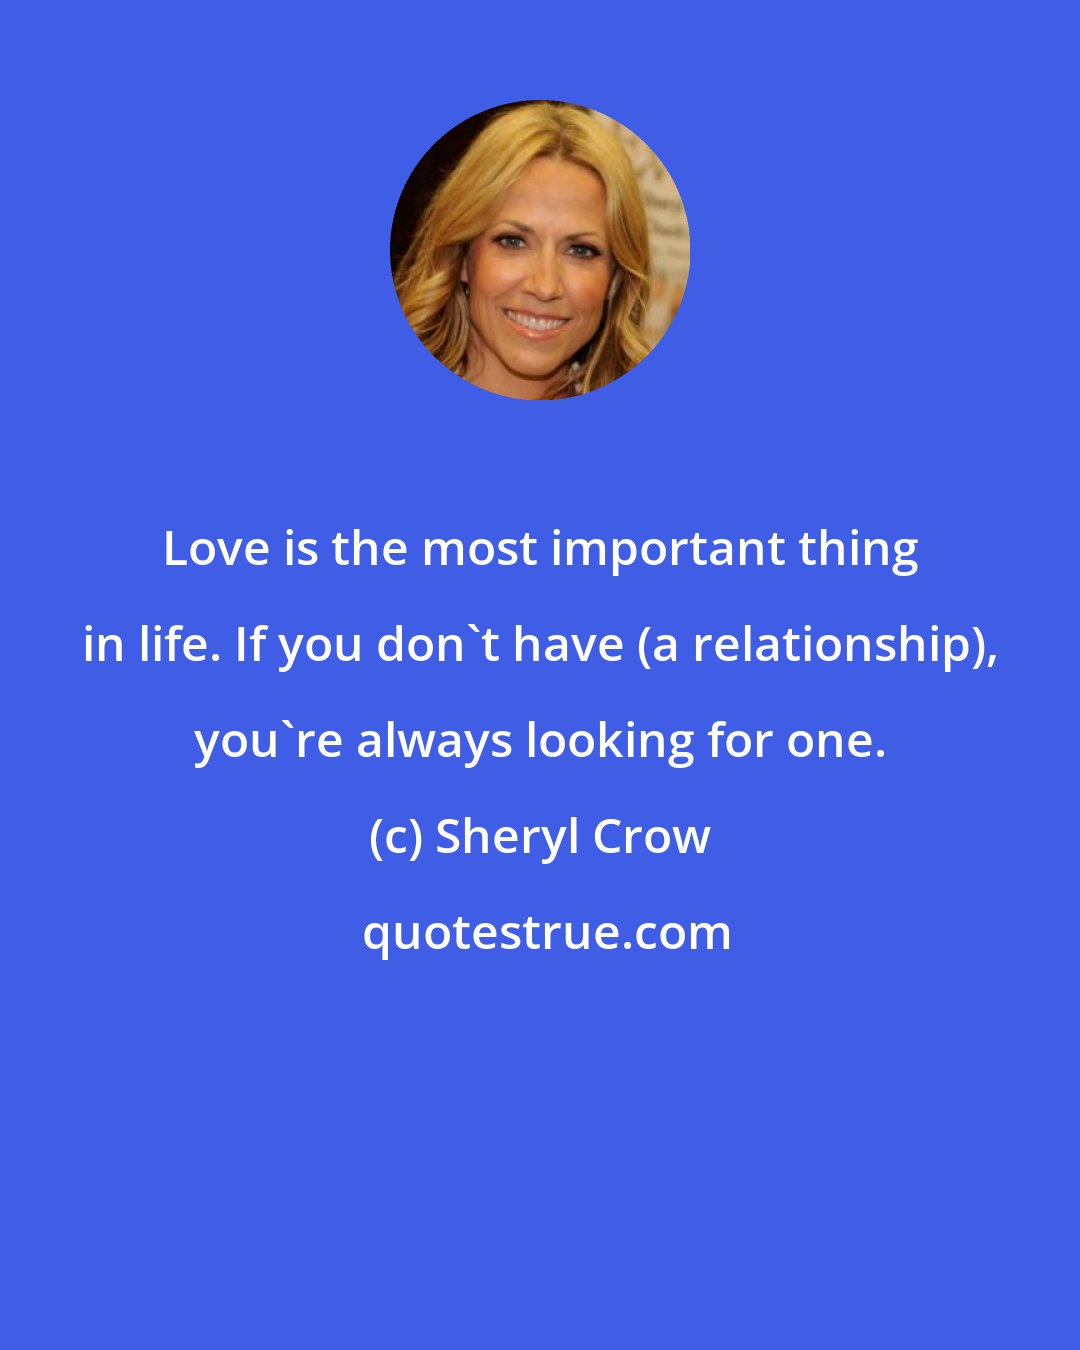 Sheryl Crow: Love is the most important thing in life. If you don't have (a relationship), you're always looking for one.